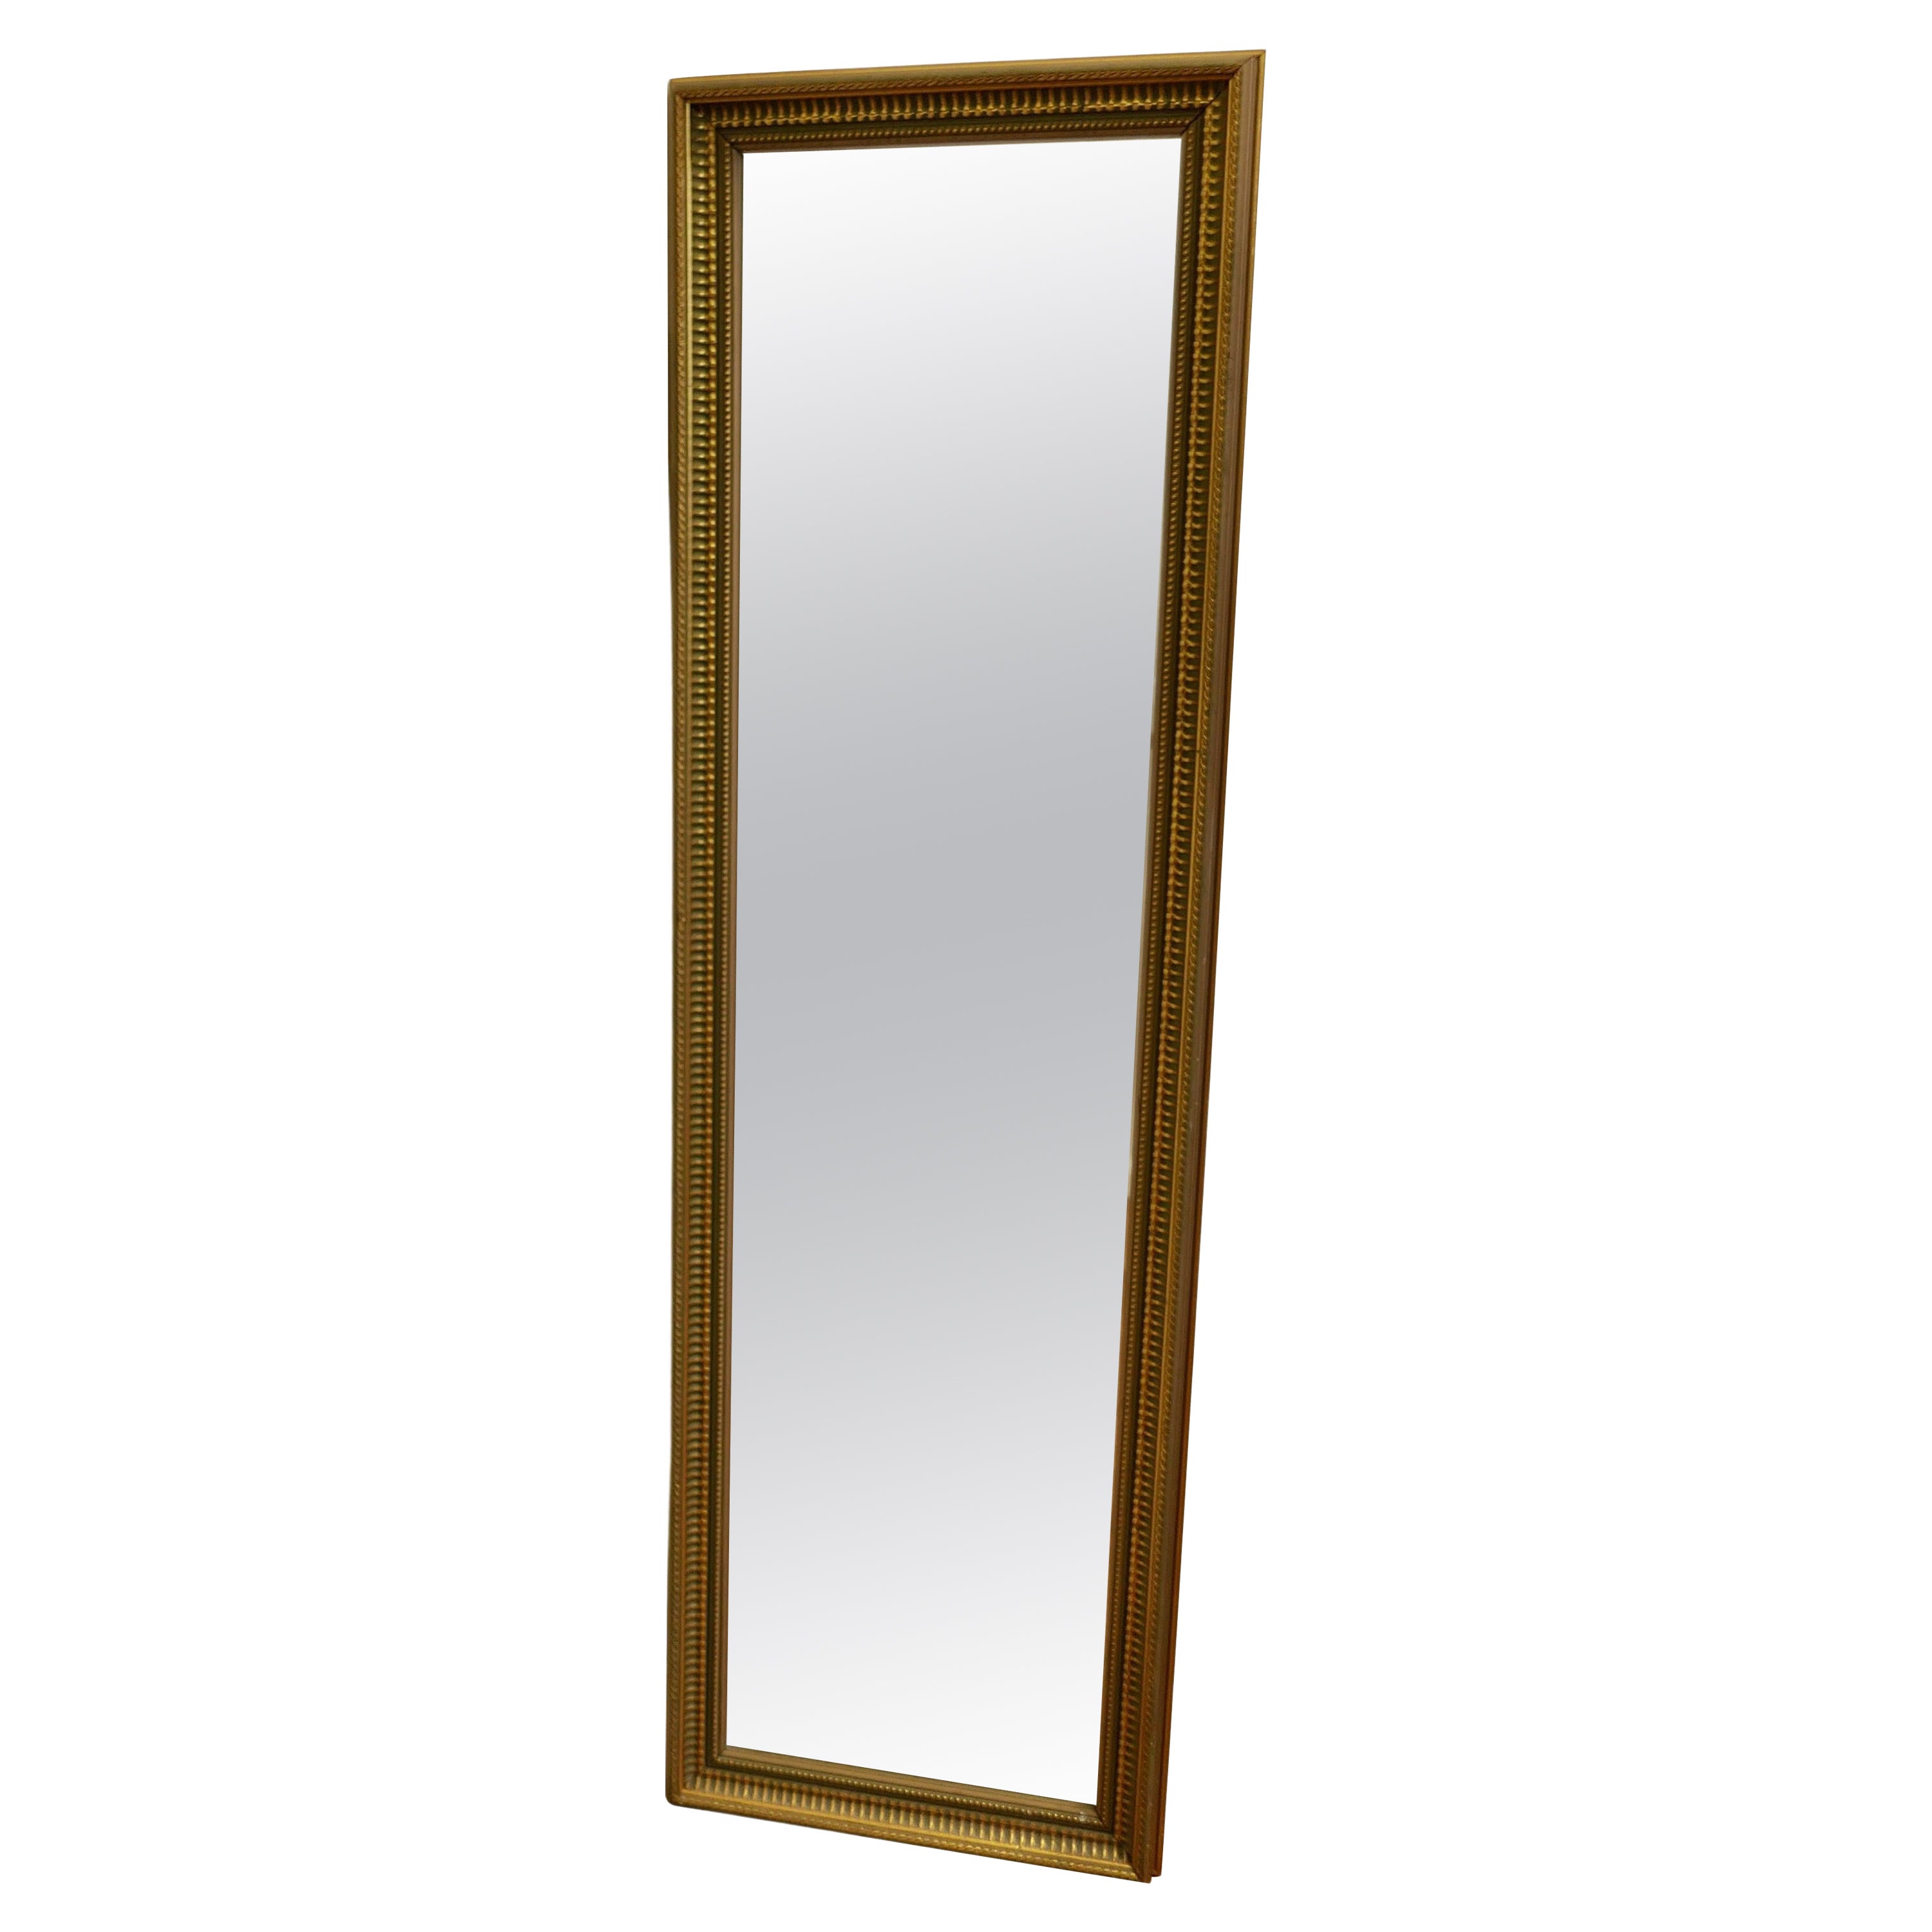 Adam Style Floor Mirrors and Full-Length Mirrors